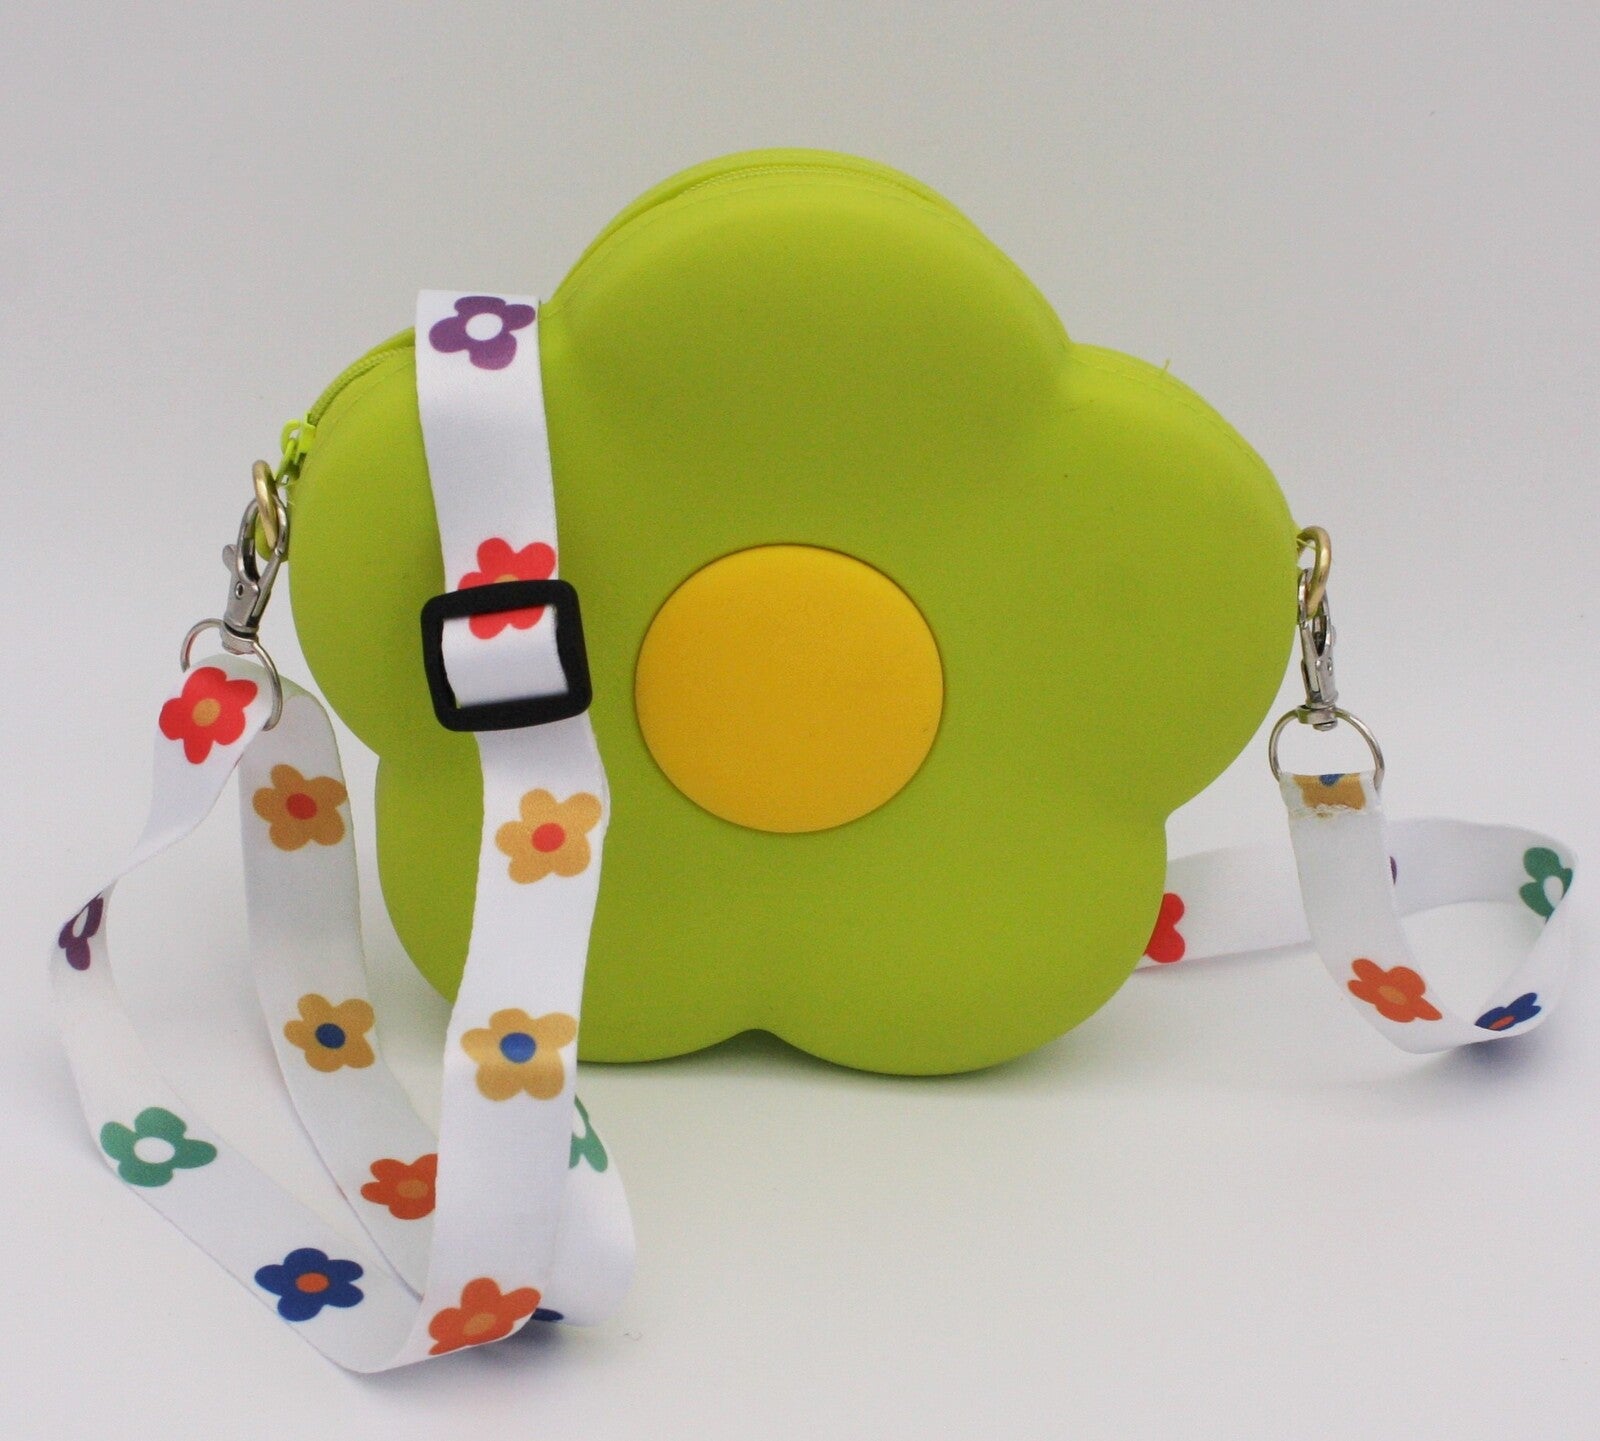 Bright green daisy shaped childrens' bag with colourful daisies on the strap